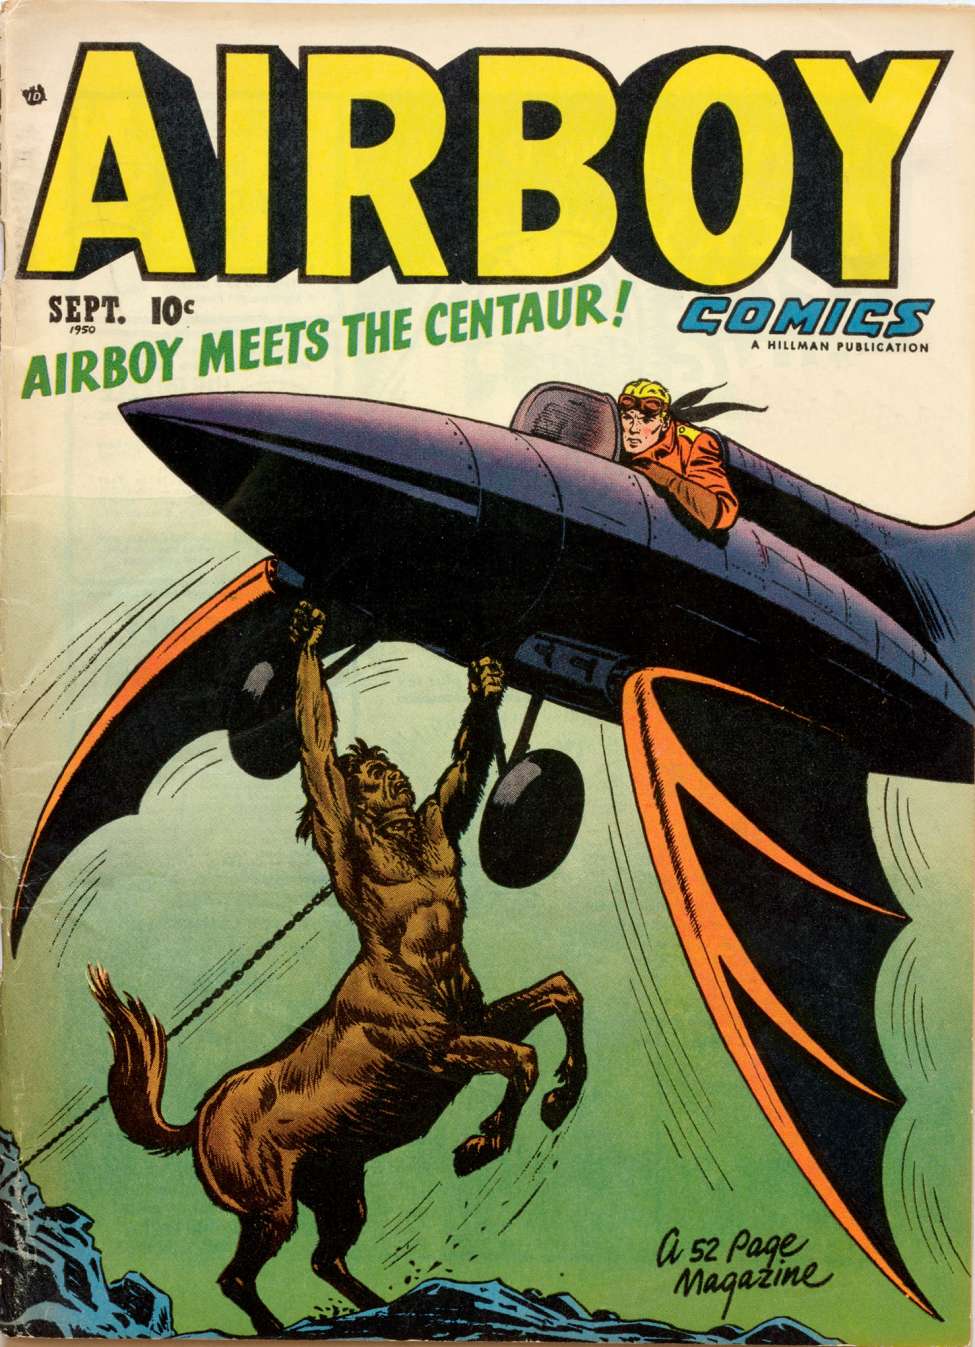 Book Cover For Airboy Comics v7 8